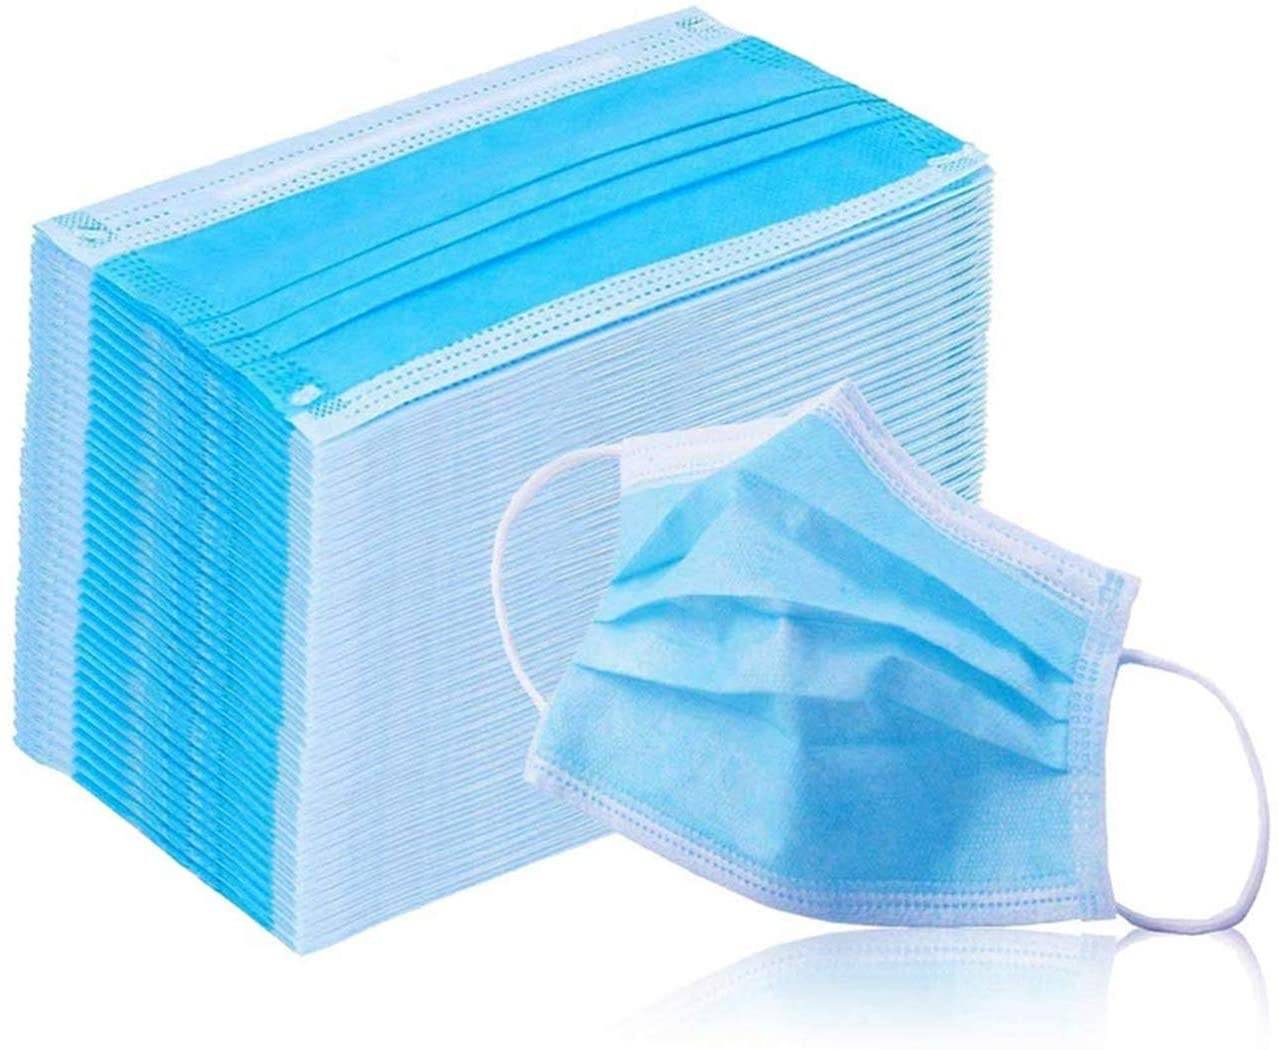 Custom wholesale Anti Virus Dust Blue 3 Ply Protective Safety Nonwoven Disposable Face Mask Surgical Dental Medical Industrial Quality 3-Ply Featured Image